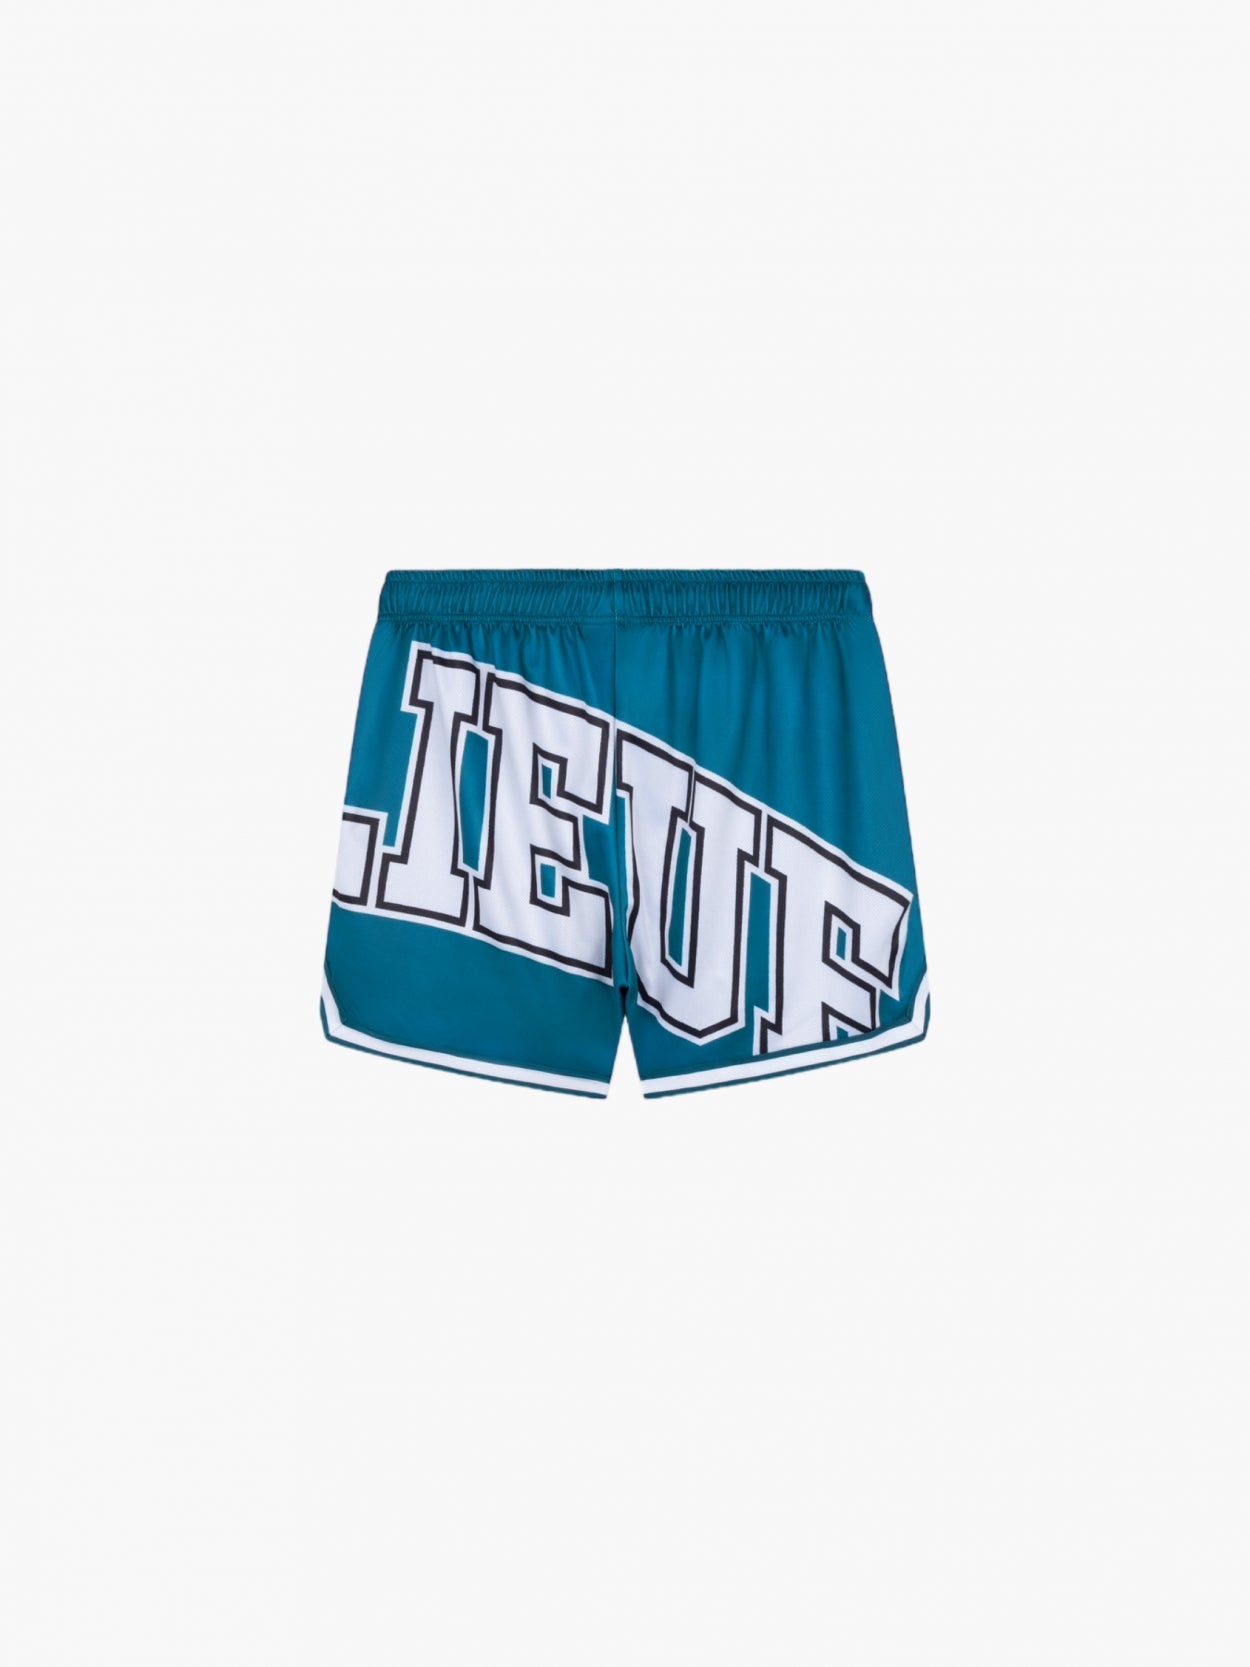 COLLEGE MESH SHORTS | STAAL BLAUW